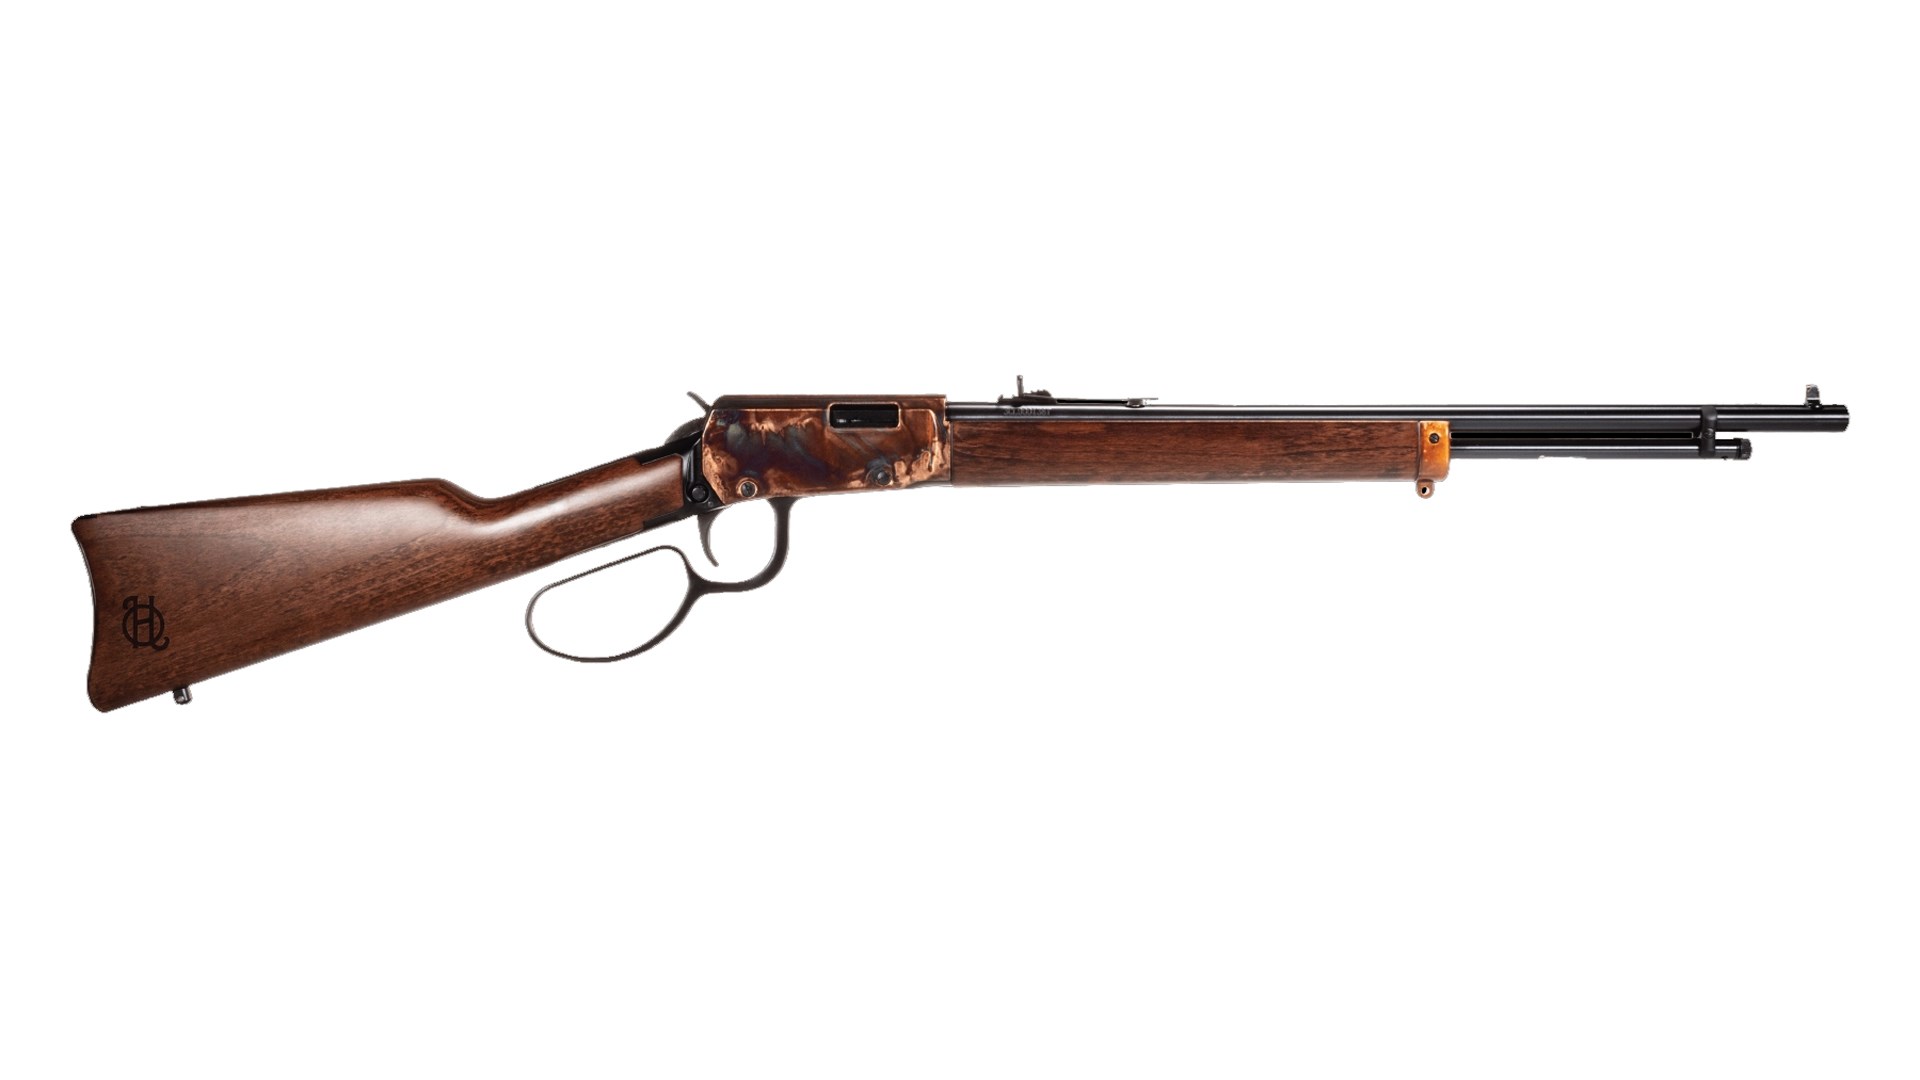 Heritage Settler lever-action rifle's right side.